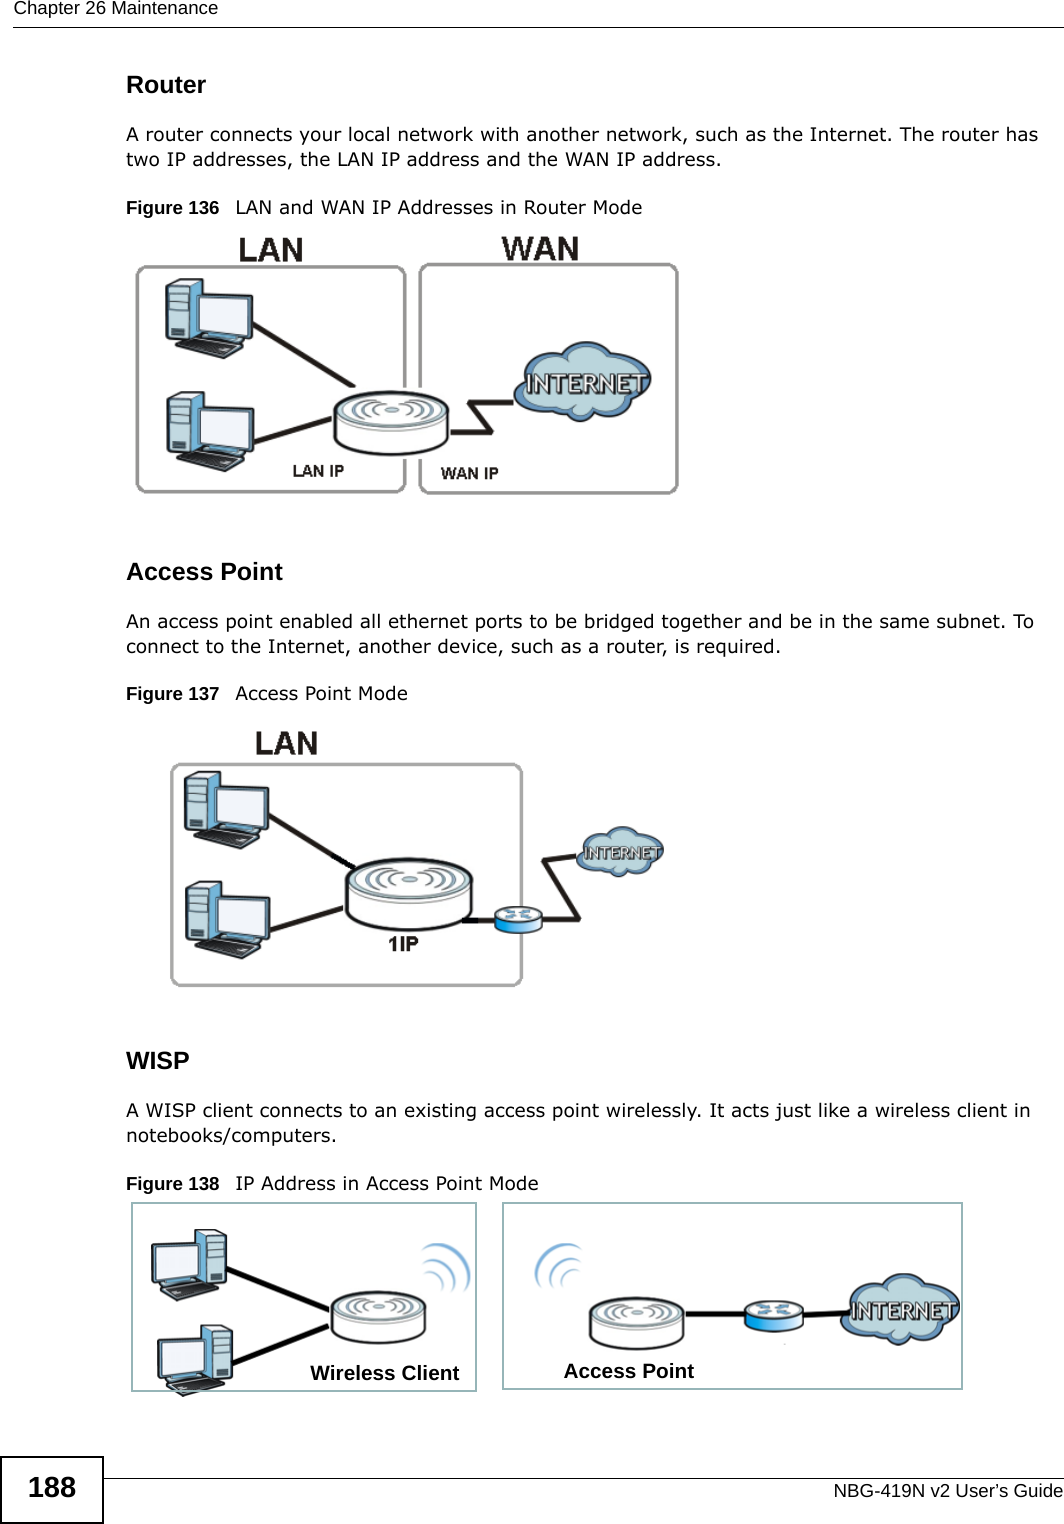 Chapter 26 MaintenanceNBG-419N v2 User’s Guide188RouterA router connects your local network with another network, such as the Internet. The router has two IP addresses, the LAN IP address and the WAN IP address.Figure 136   LAN and WAN IP Addresses in Router ModeAccess PointAn access point enabled all ethernet ports to be bridged together and be in the same subnet. To connect to the Internet, another device, such as a router, is required.Figure 137   Access Point ModeWISPA WISP client connects to an existing access point wirelessly. It acts just like a wireless client in notebooks/computers. Figure 138   IP Address in Access Point ModeAccess PointWireless Client